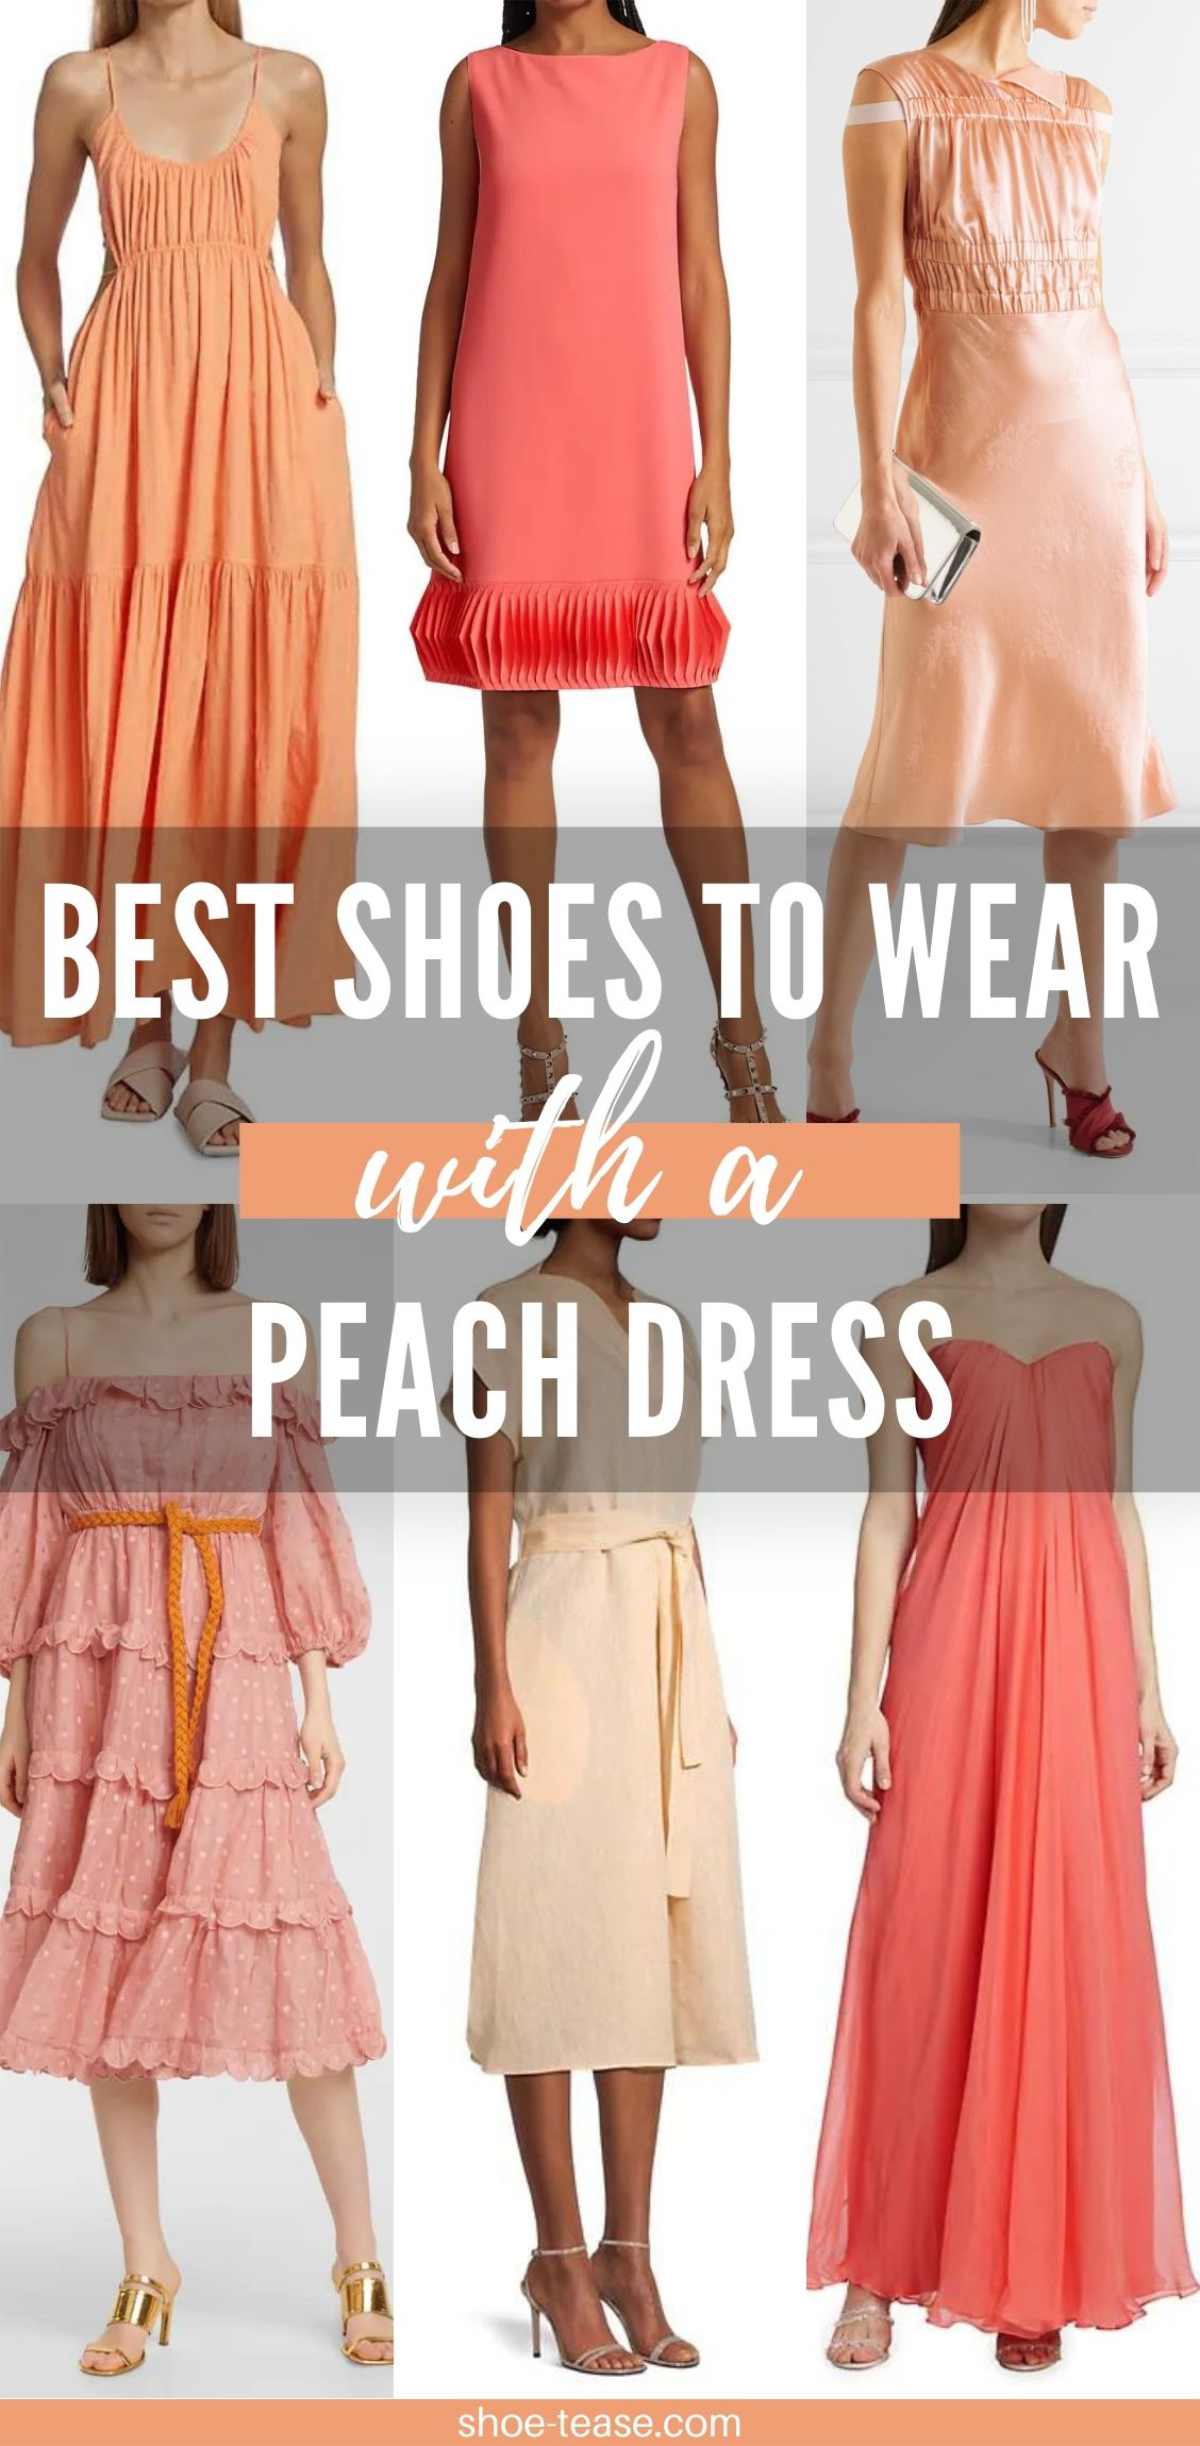 Best Color Shoes to Wear with a Peach Dress